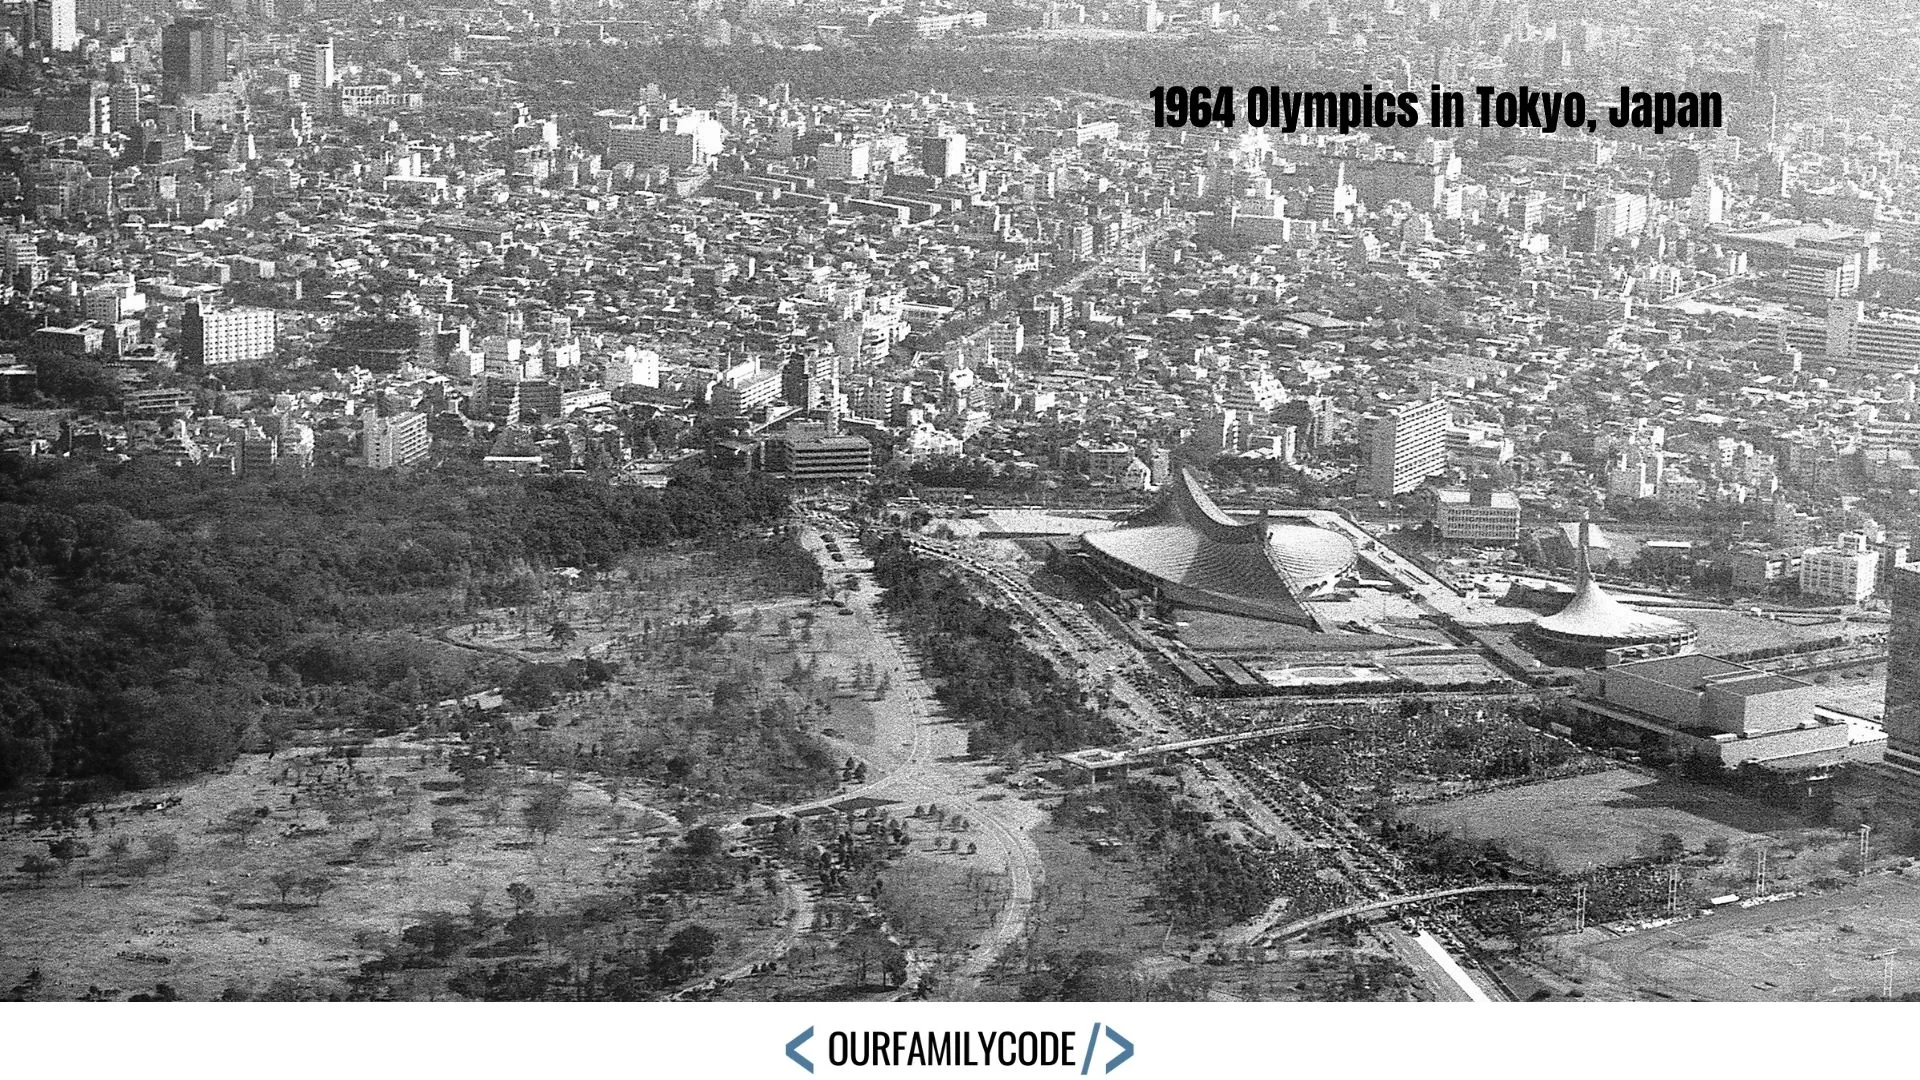 An aerial view of the Yoyogi National Gymnasium designed by Kenzo Tange for the 1964 Summer Olympics in Tokyo, Japan.